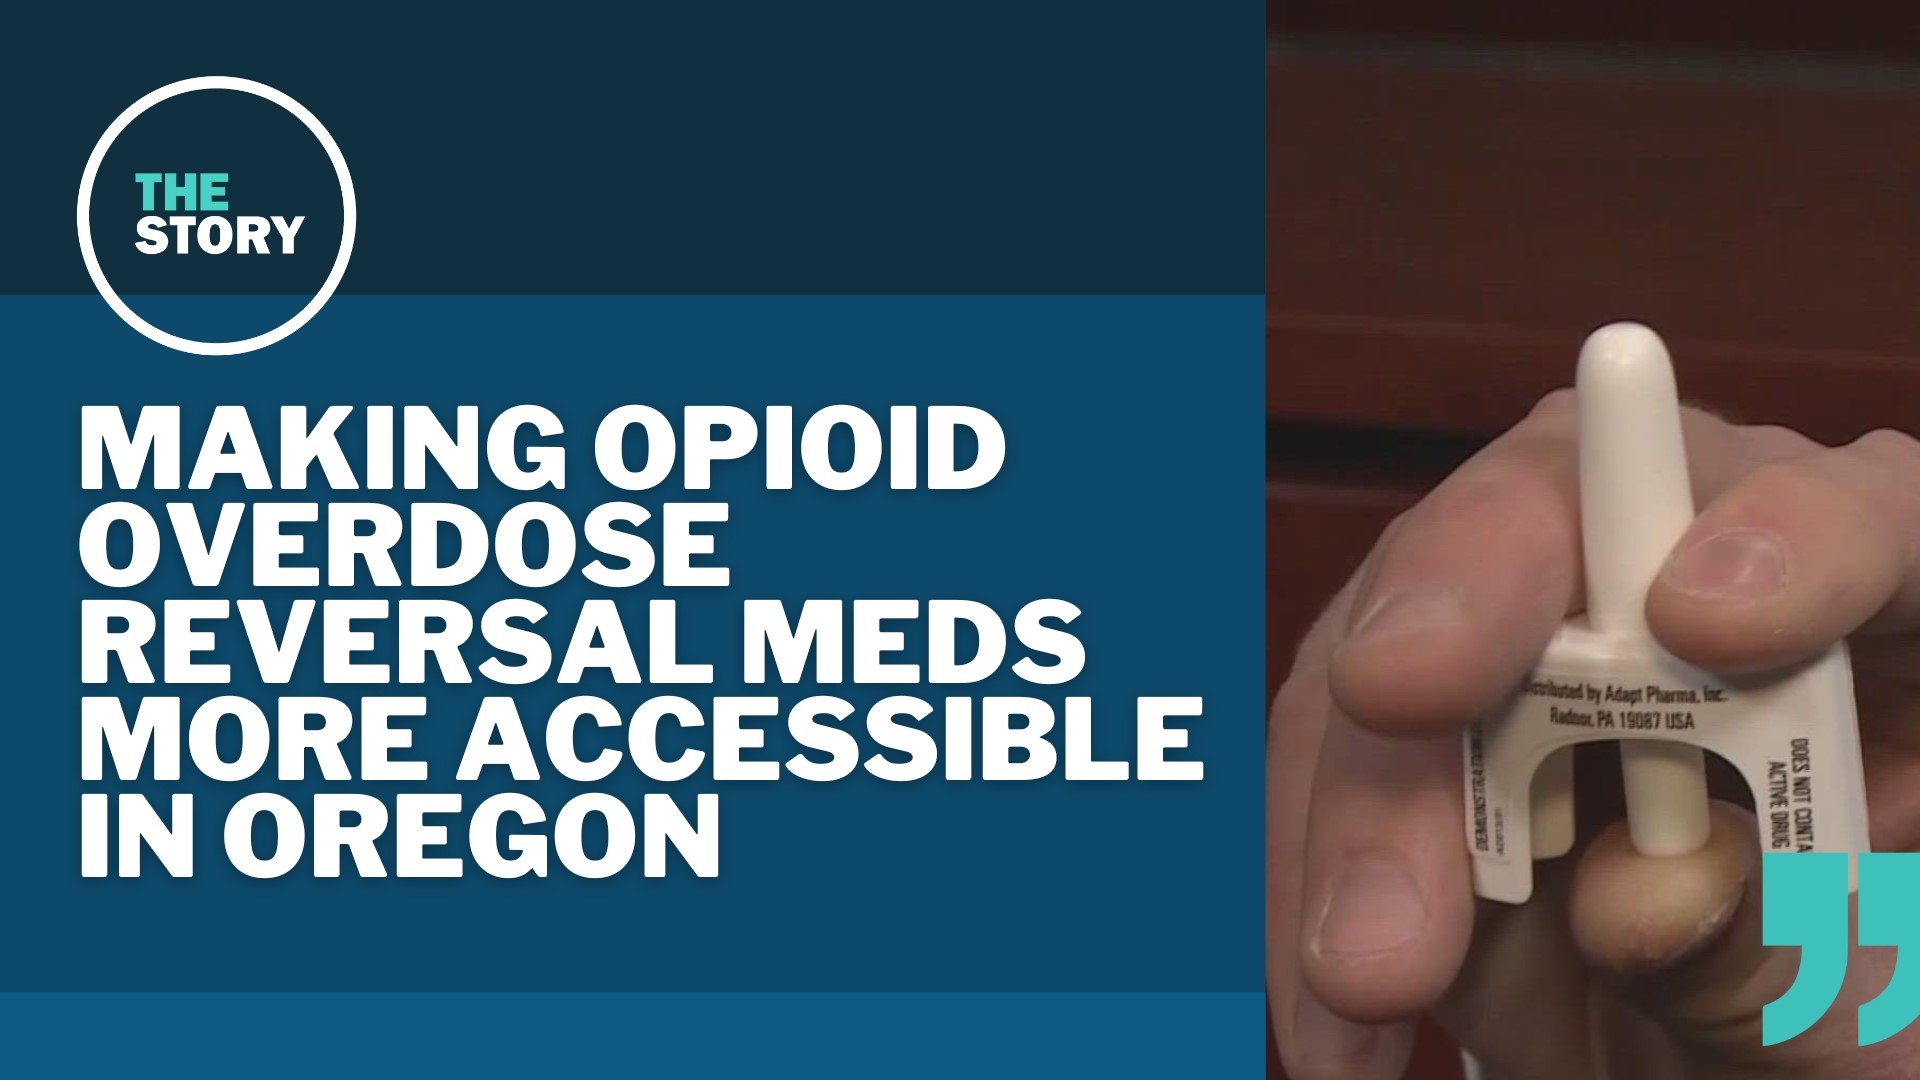 Unintentional overdose deaths have nearly tripled in Oregon in the last three years. Narcan, or naloxone, could prevent deaths if made available.